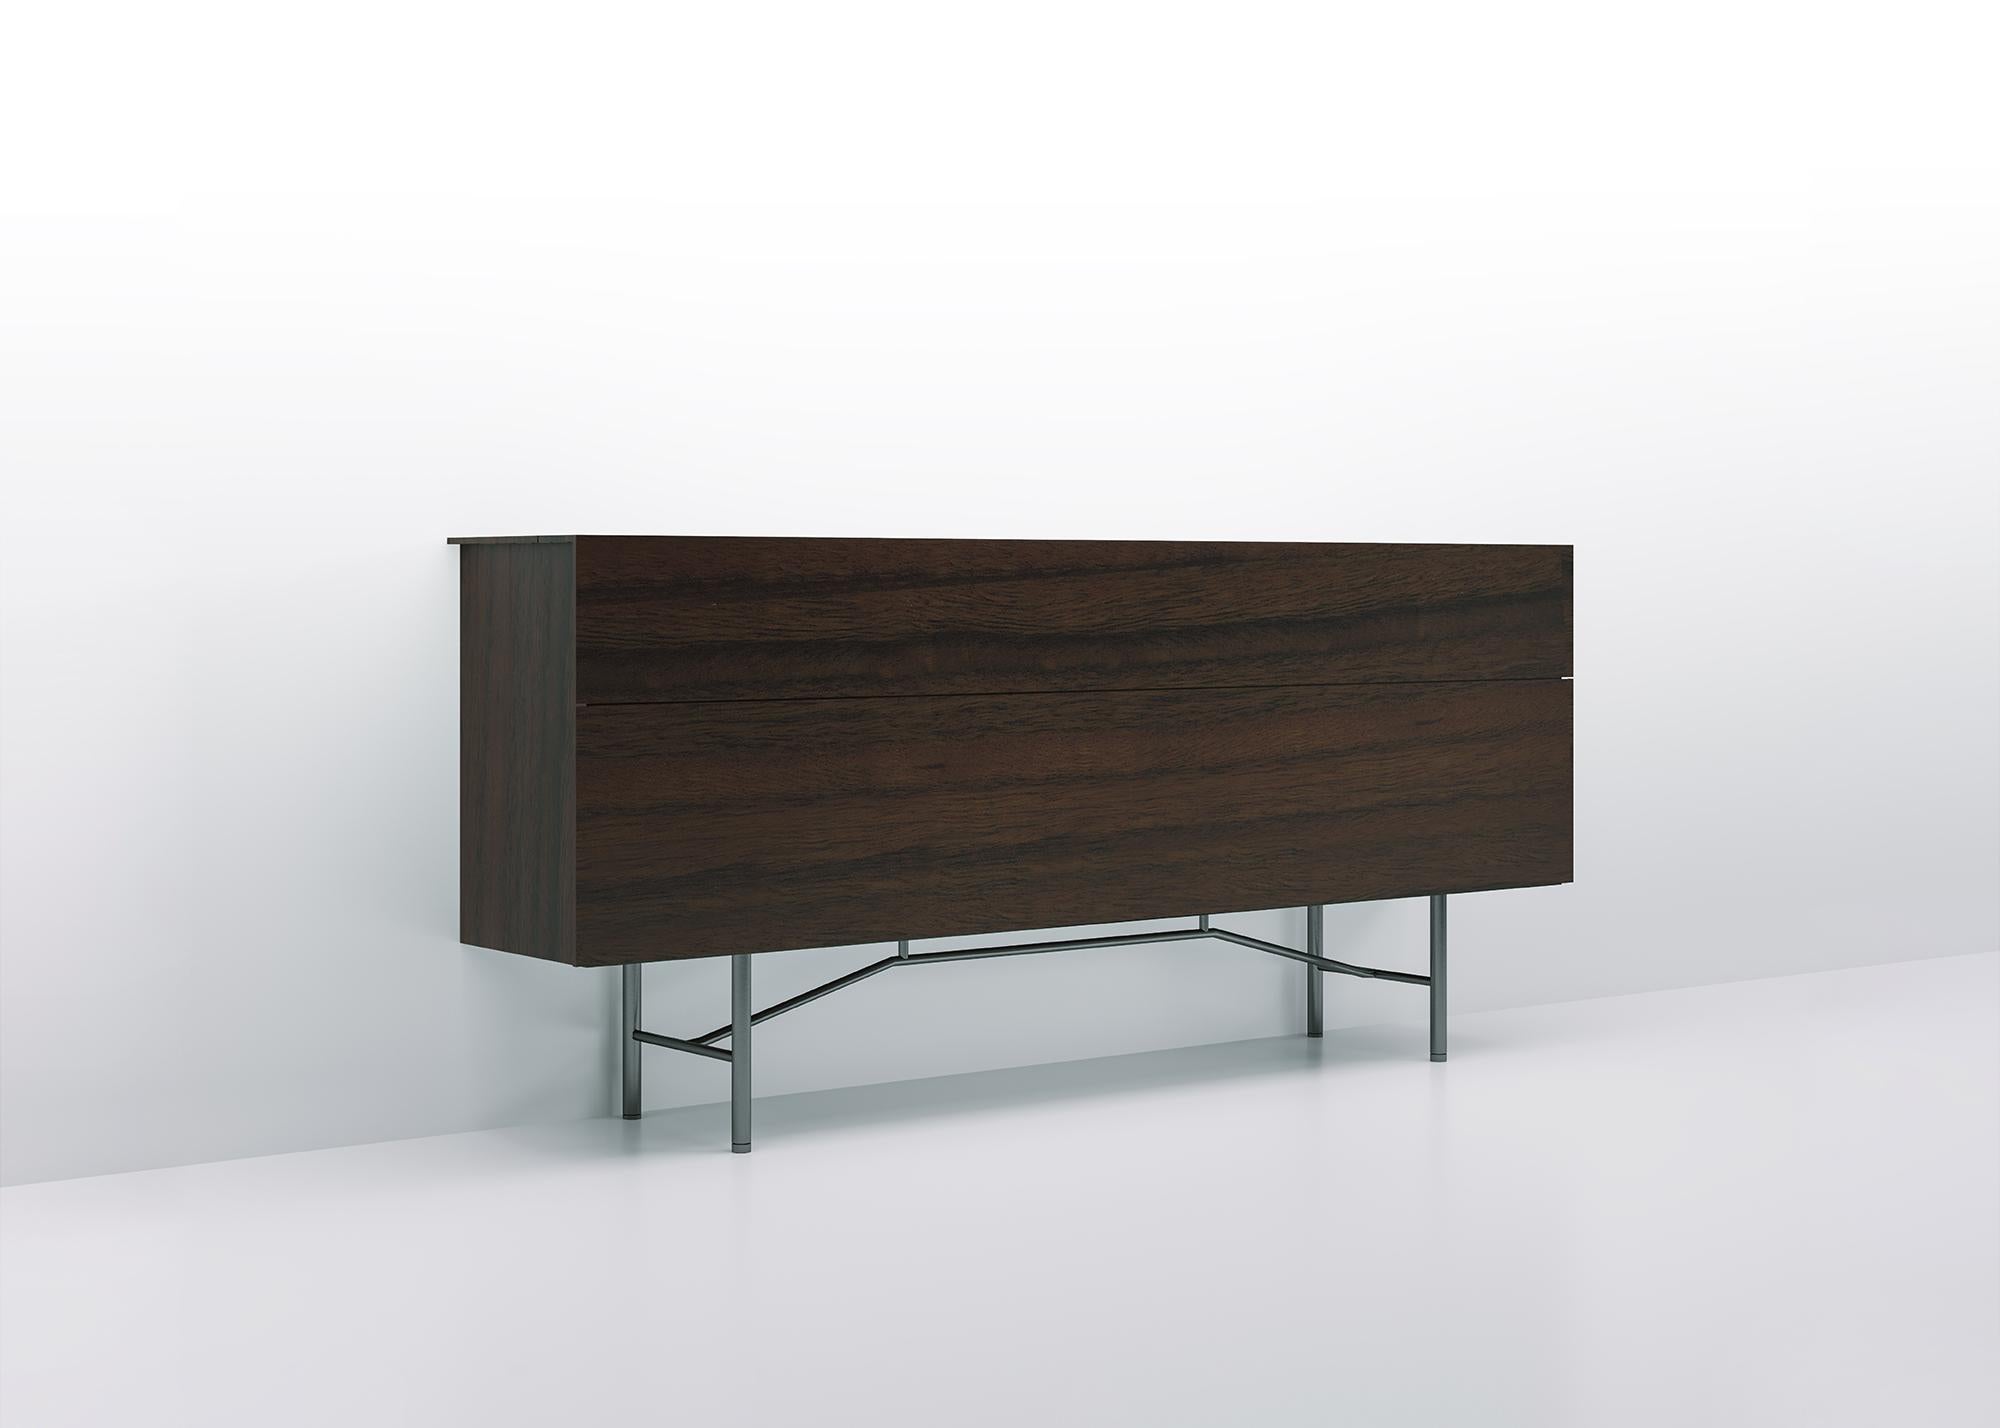 Particularly high buffet, of great storage capacity, characterized by the unusual horizontal division into two compartments with different heights, closed by two large flap doors of finely tapered edges. The upper compartment adopts an evolution of